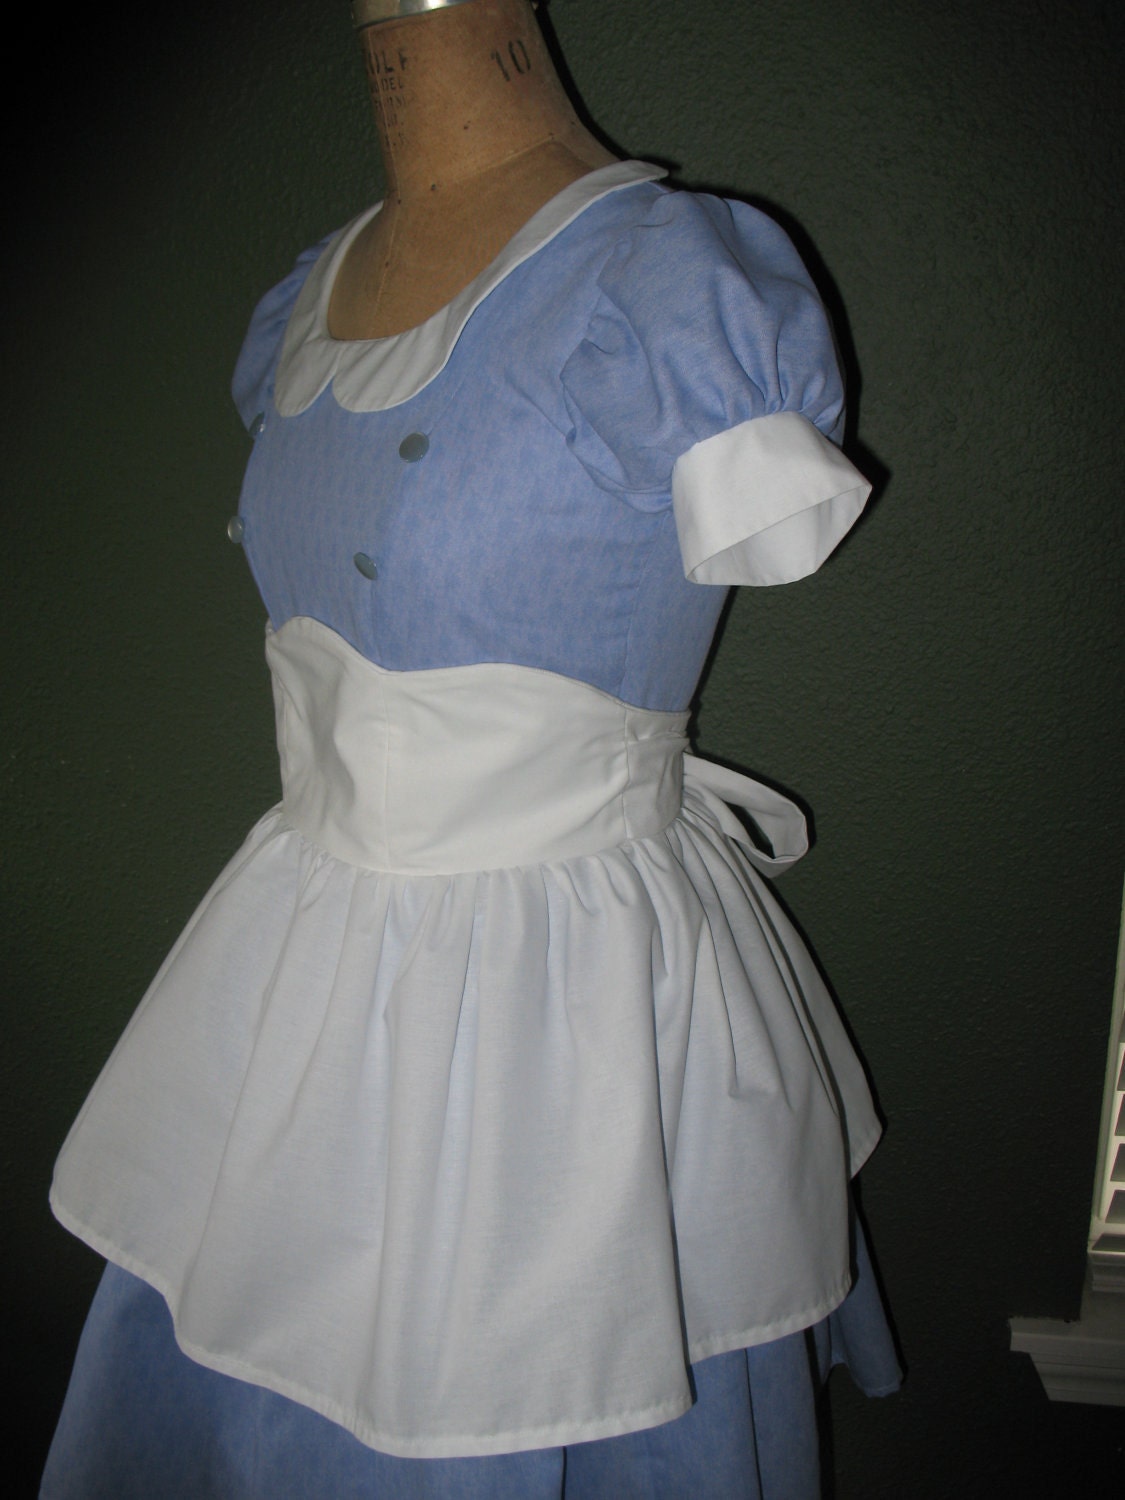 Made to order Bioshock Little Sister dress by SweetHeartClothing